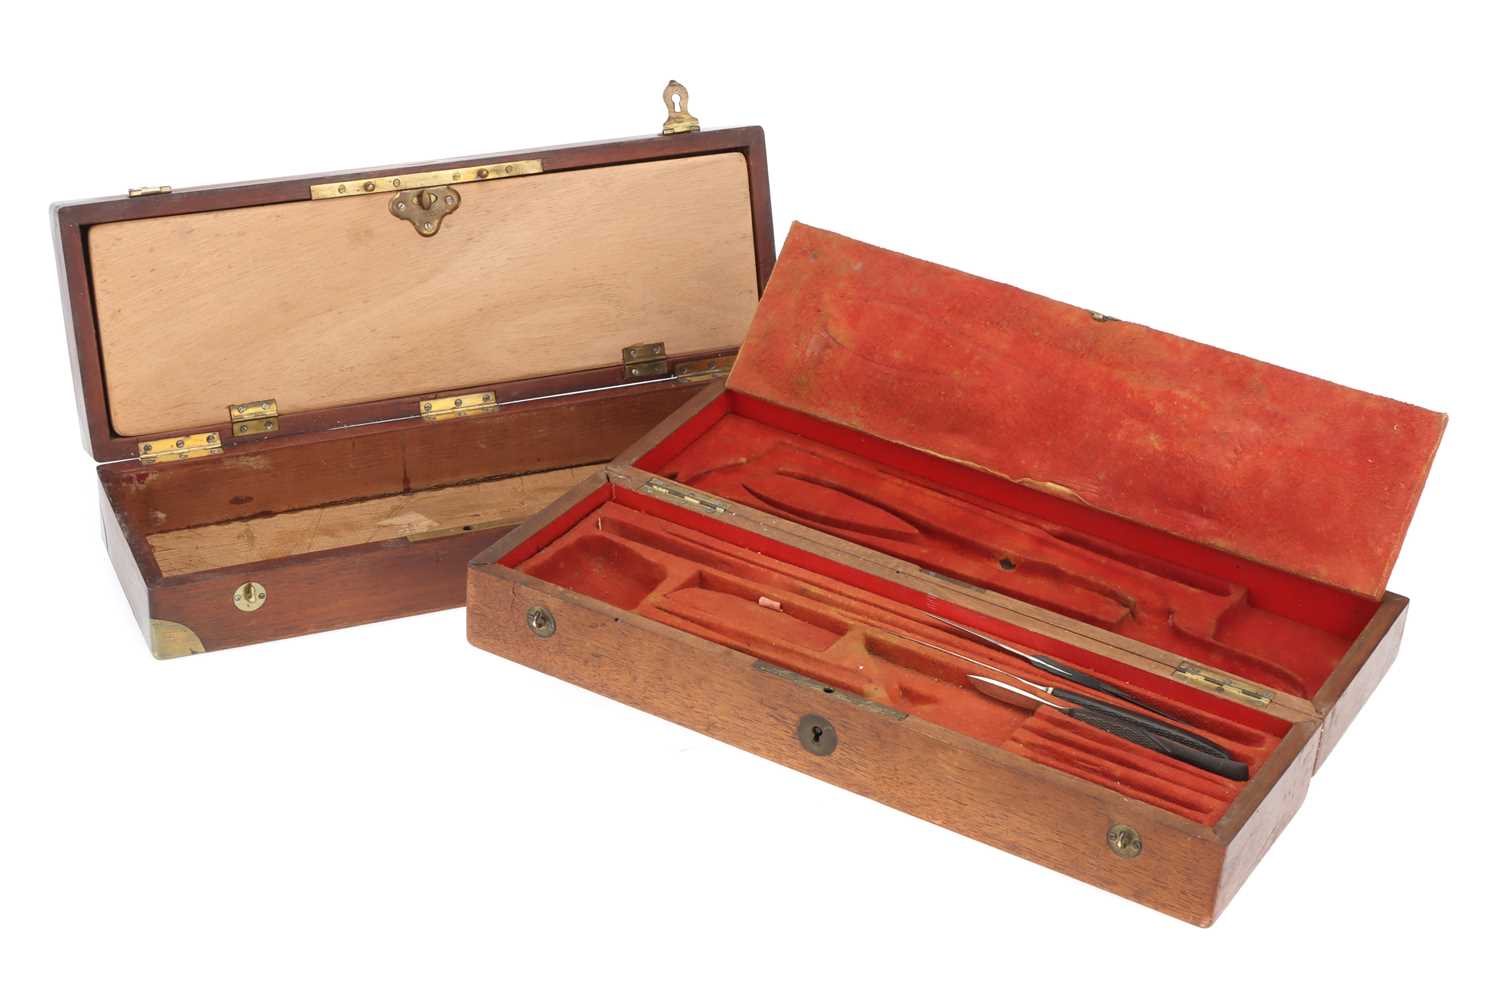 Lot 12 - Two French Surgical Medical Instrument Sets